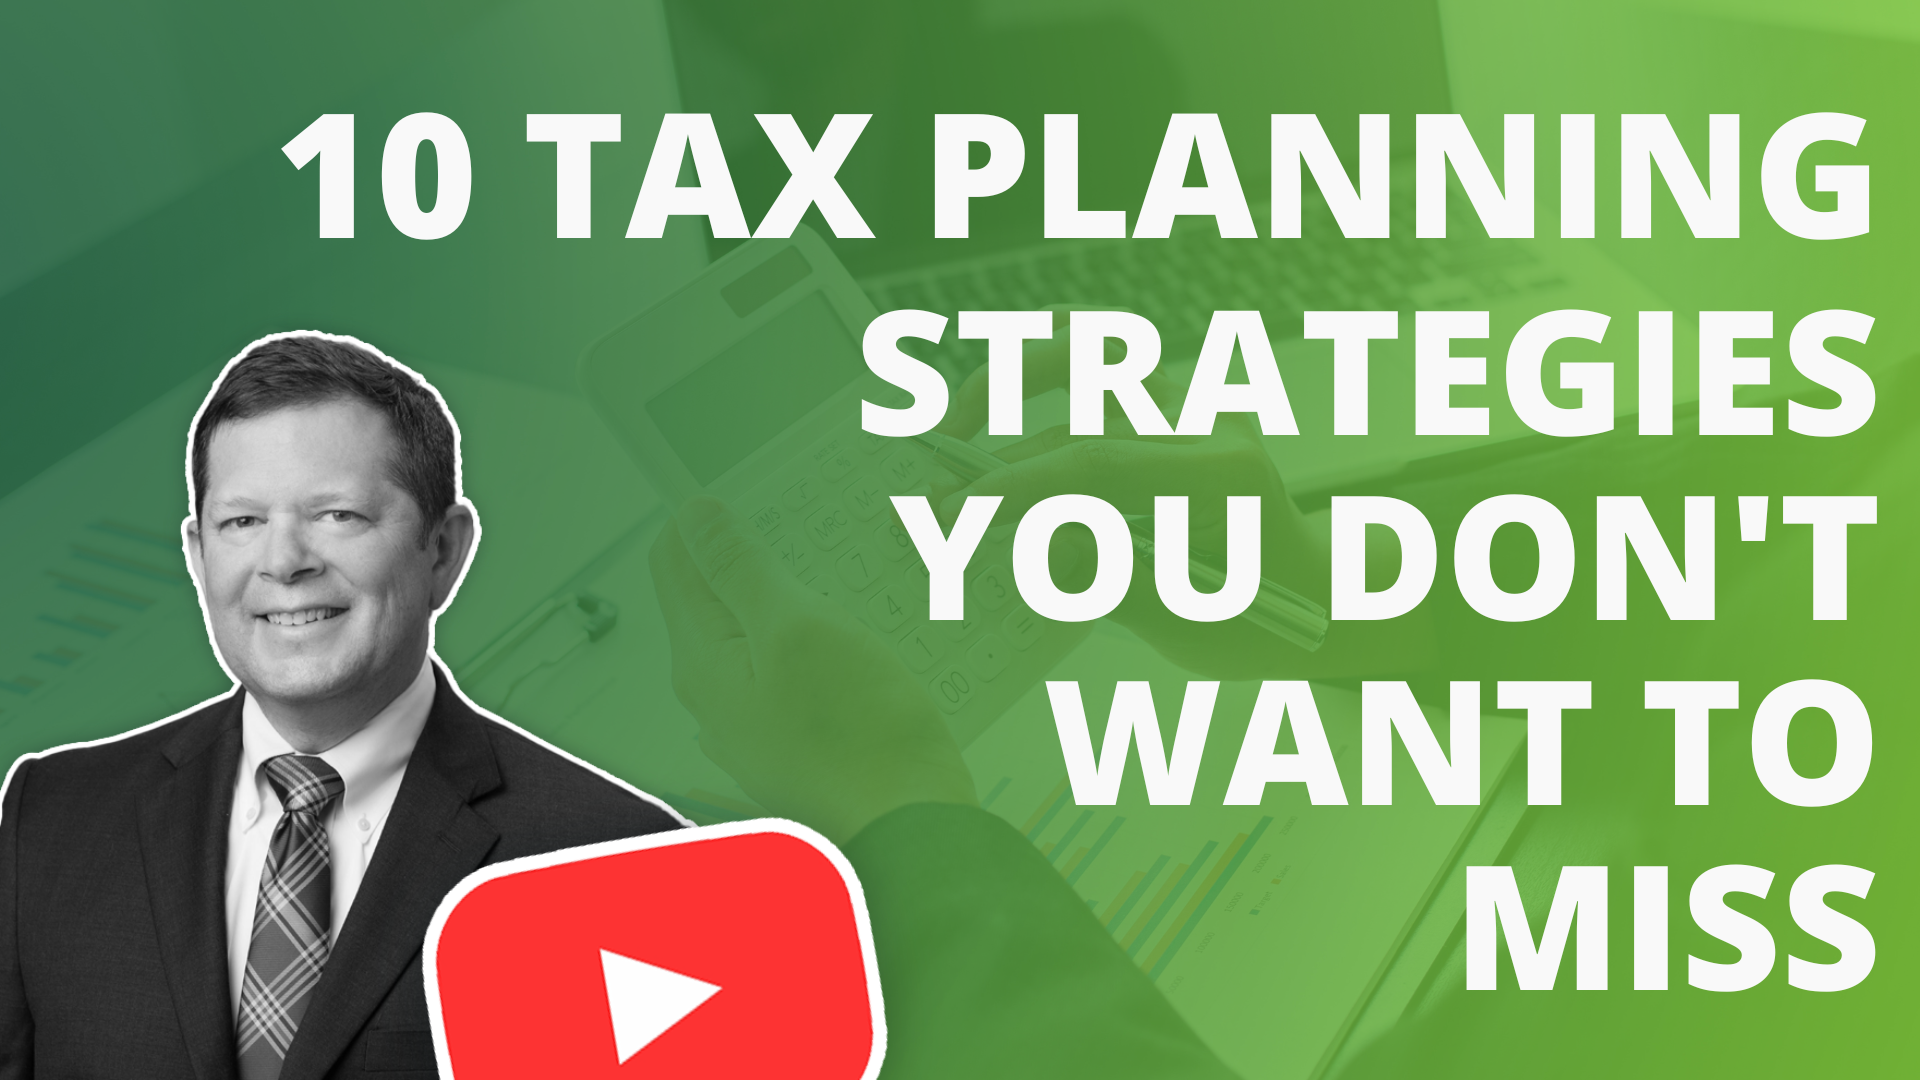 10 Tax Planning Opportunities You Don't Want to Miss